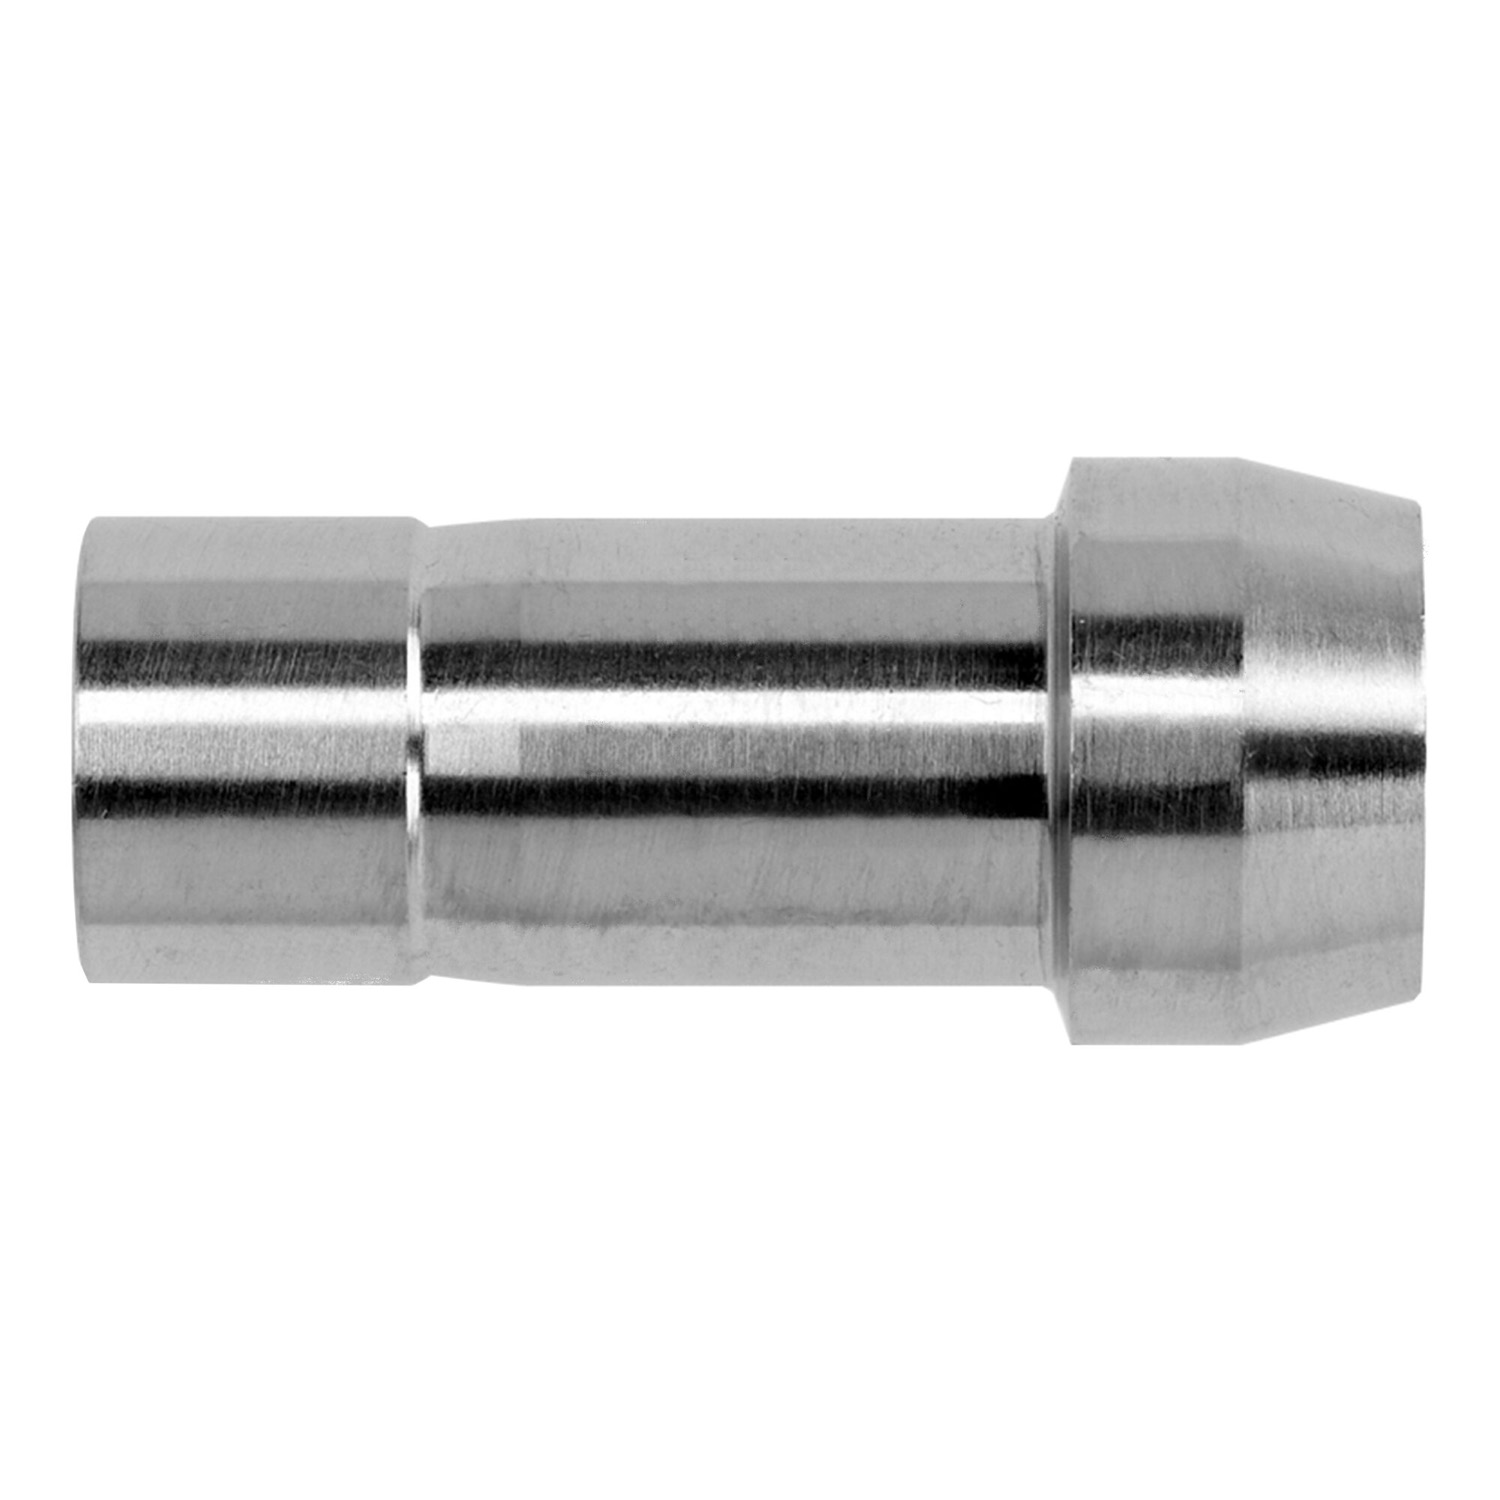 Port - Connector, Compression Fittings, N2440 Series